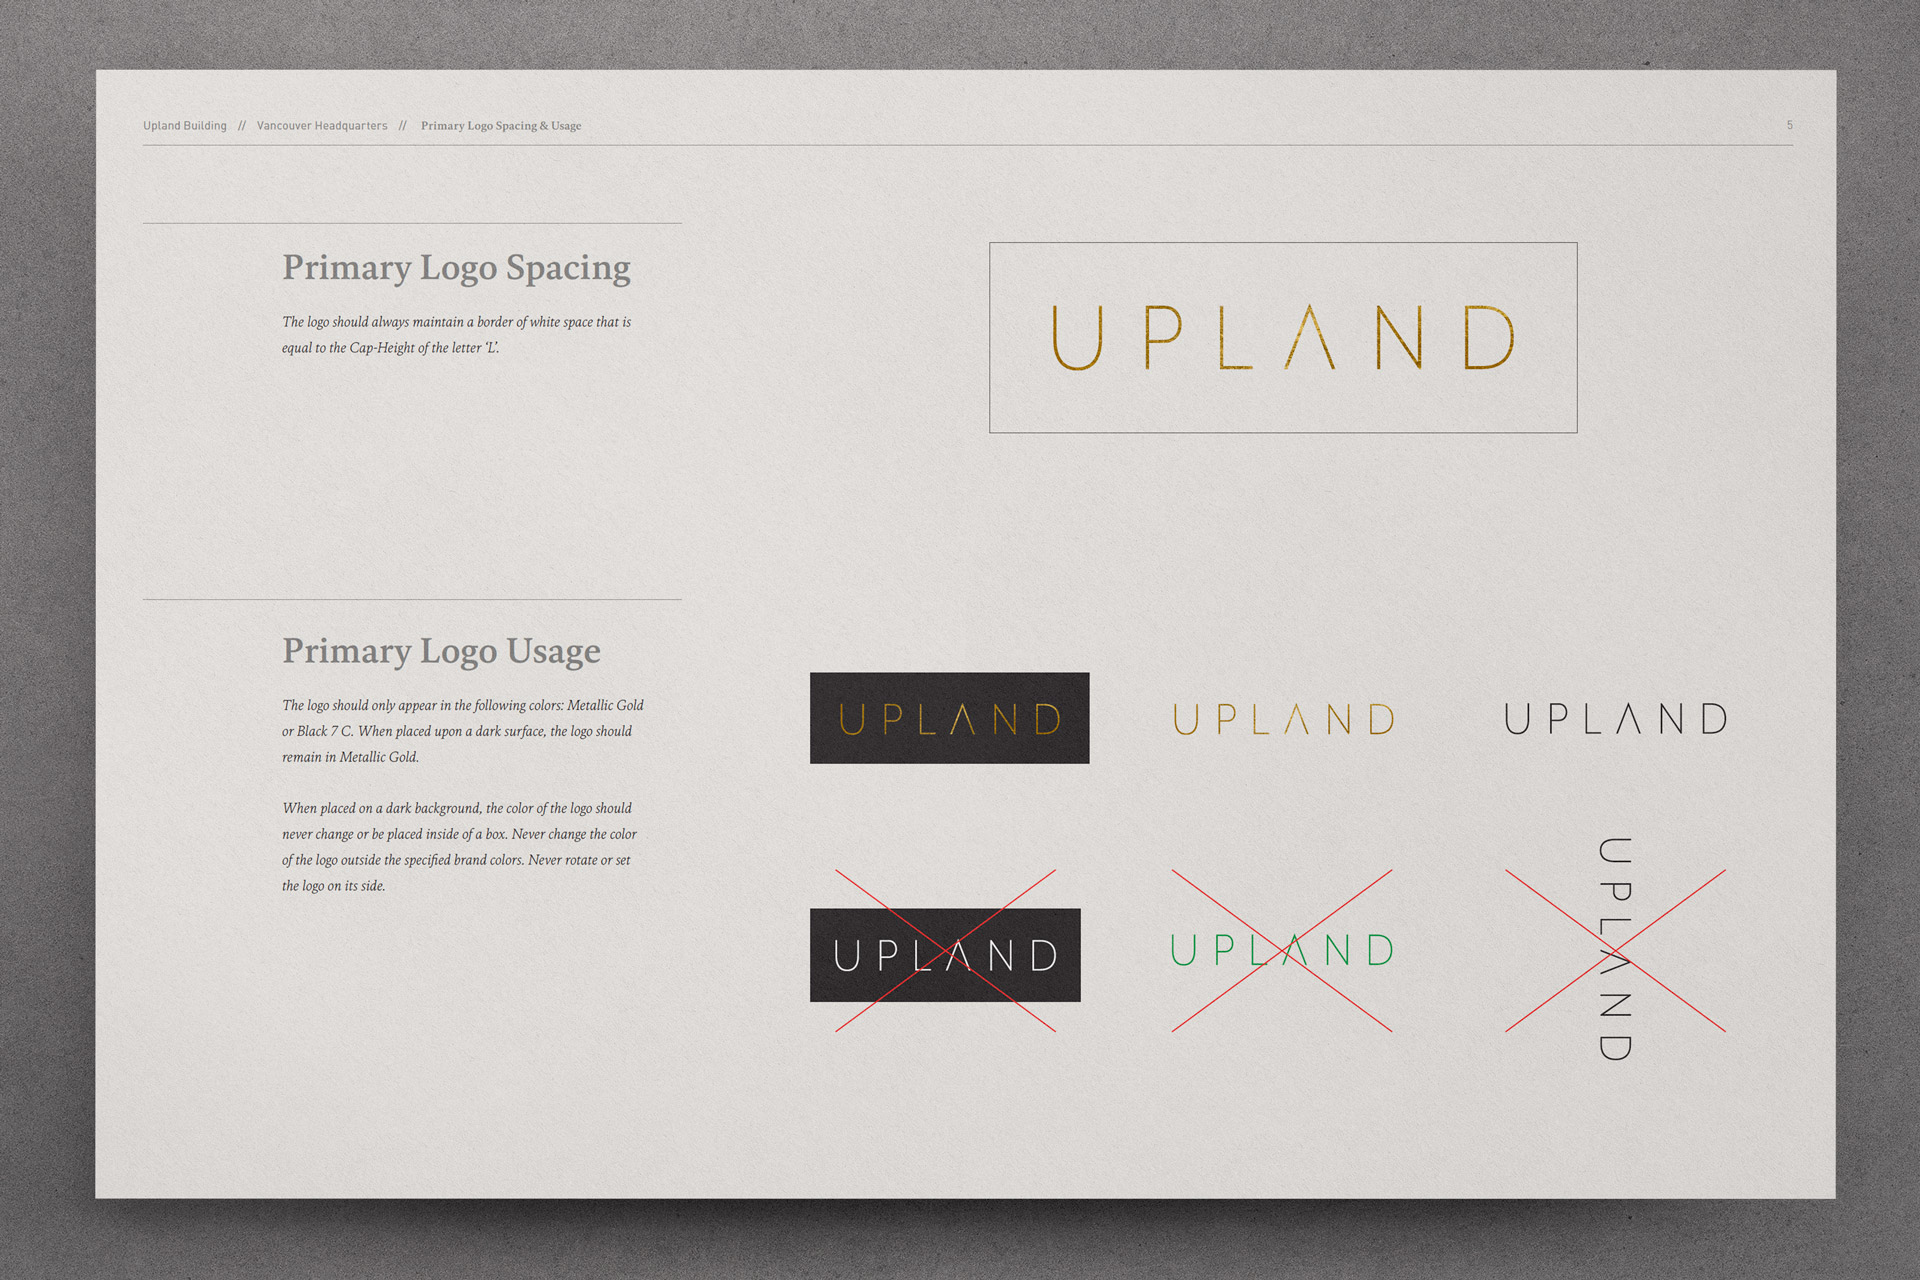 Upland Brand Book Logo spacing created by Incubate Design for Holland Residential